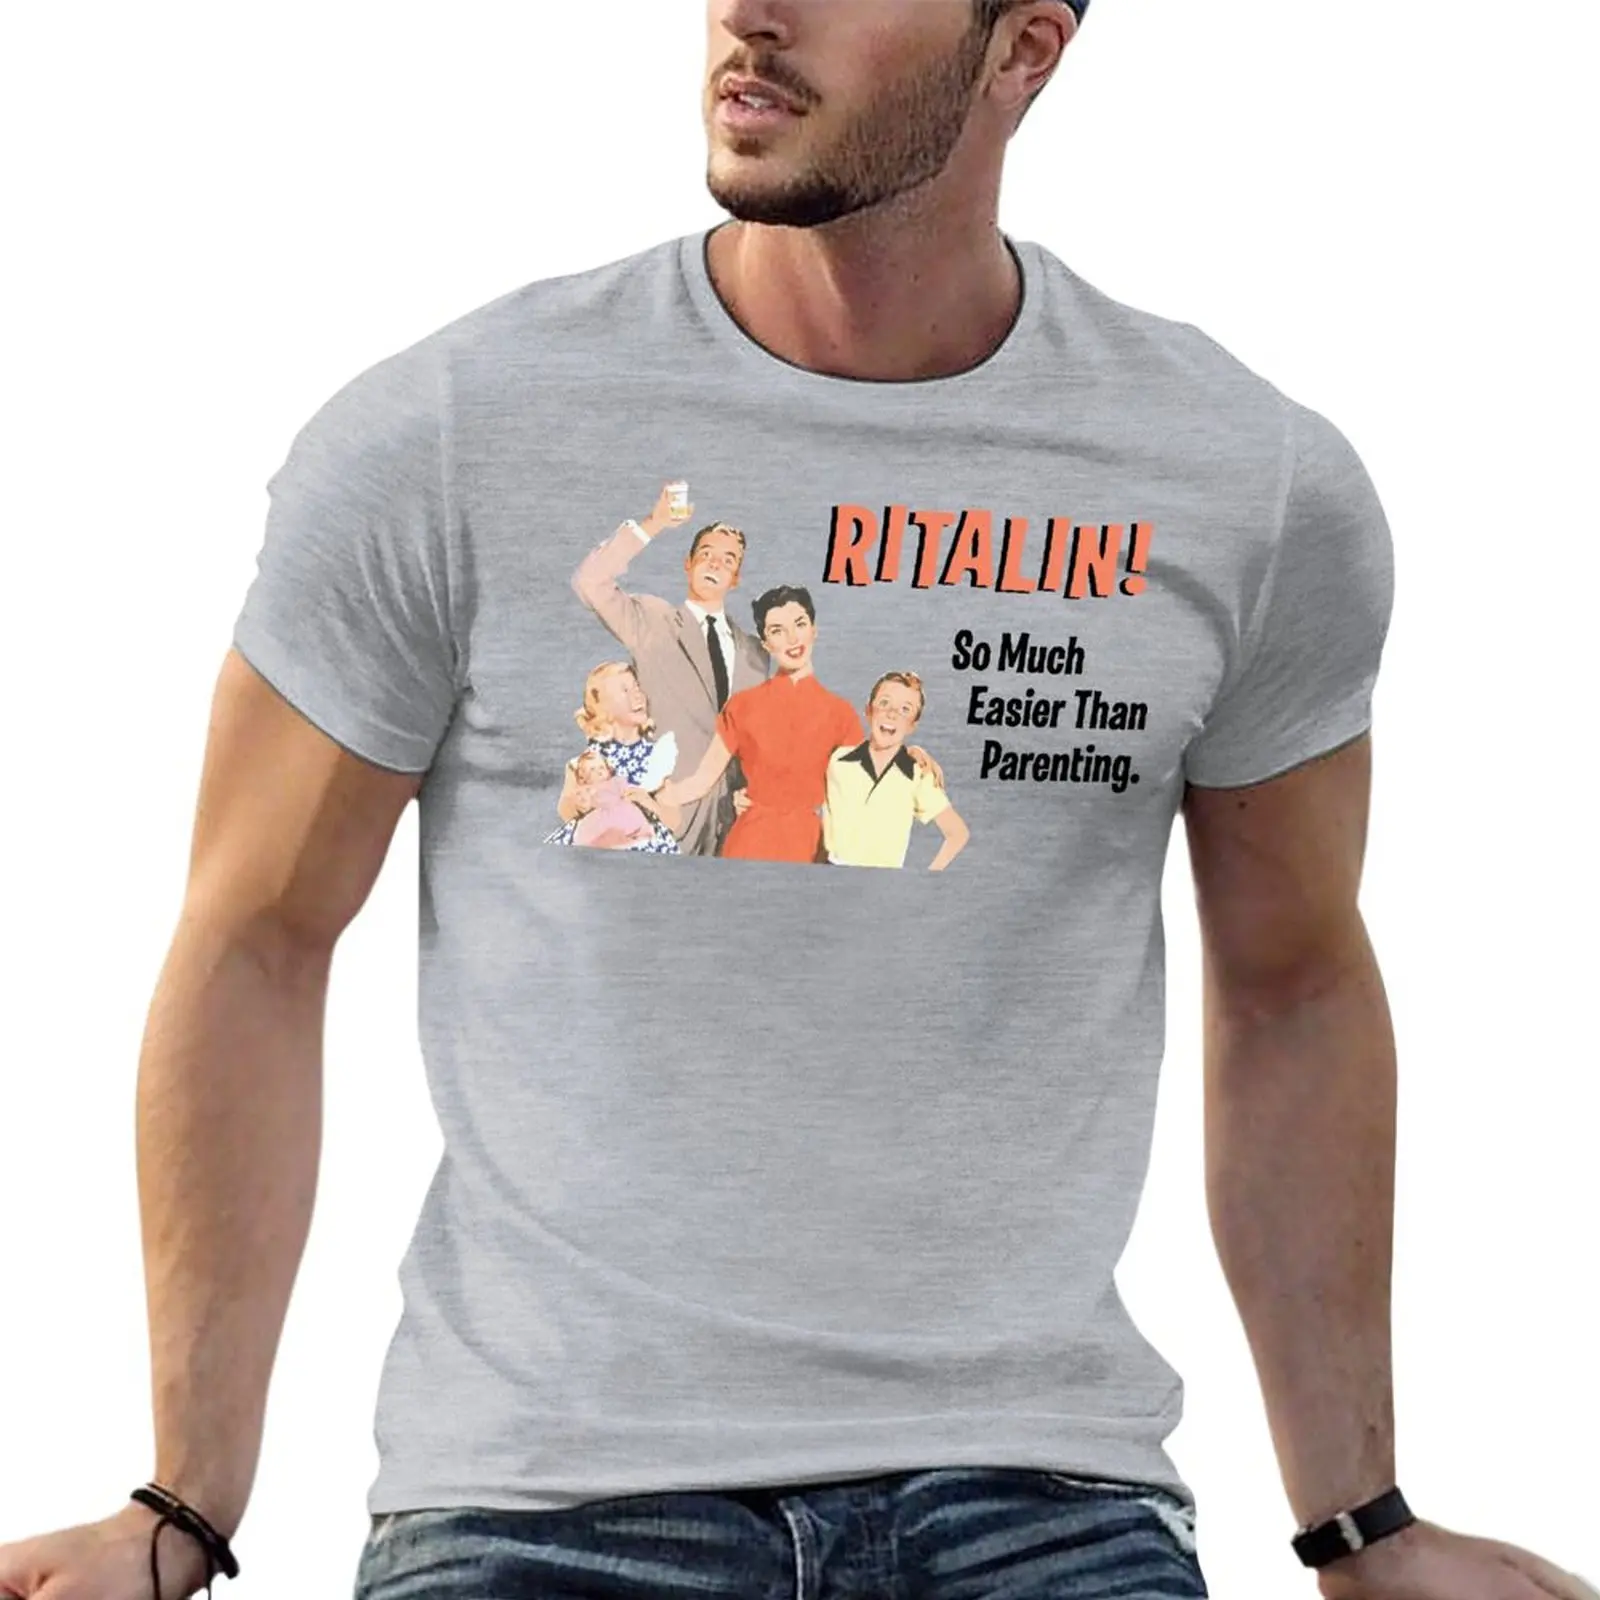 

Ritalin! So Mush Easier Than Parenting Oversized T-Shirts Personalized Men'S Clothes Short Sleeve Streetwear Large Size Top Tee